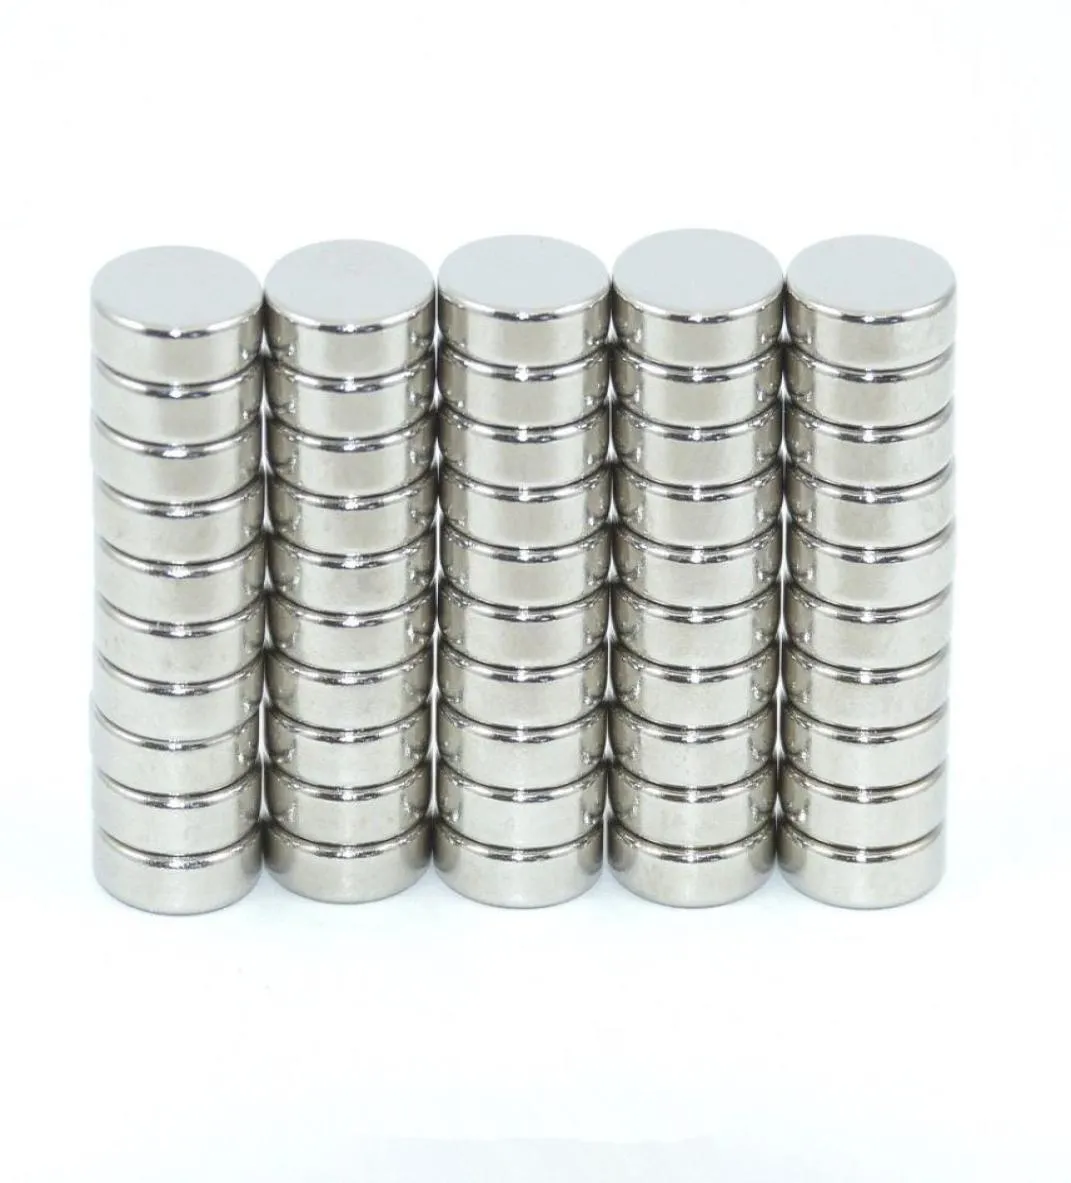 Neodymium Magnet Disc Permanent N35 NdFeB Small Round Super Powerful Strong Magnetic Magnets 8mm x2mm 200pcs7000245